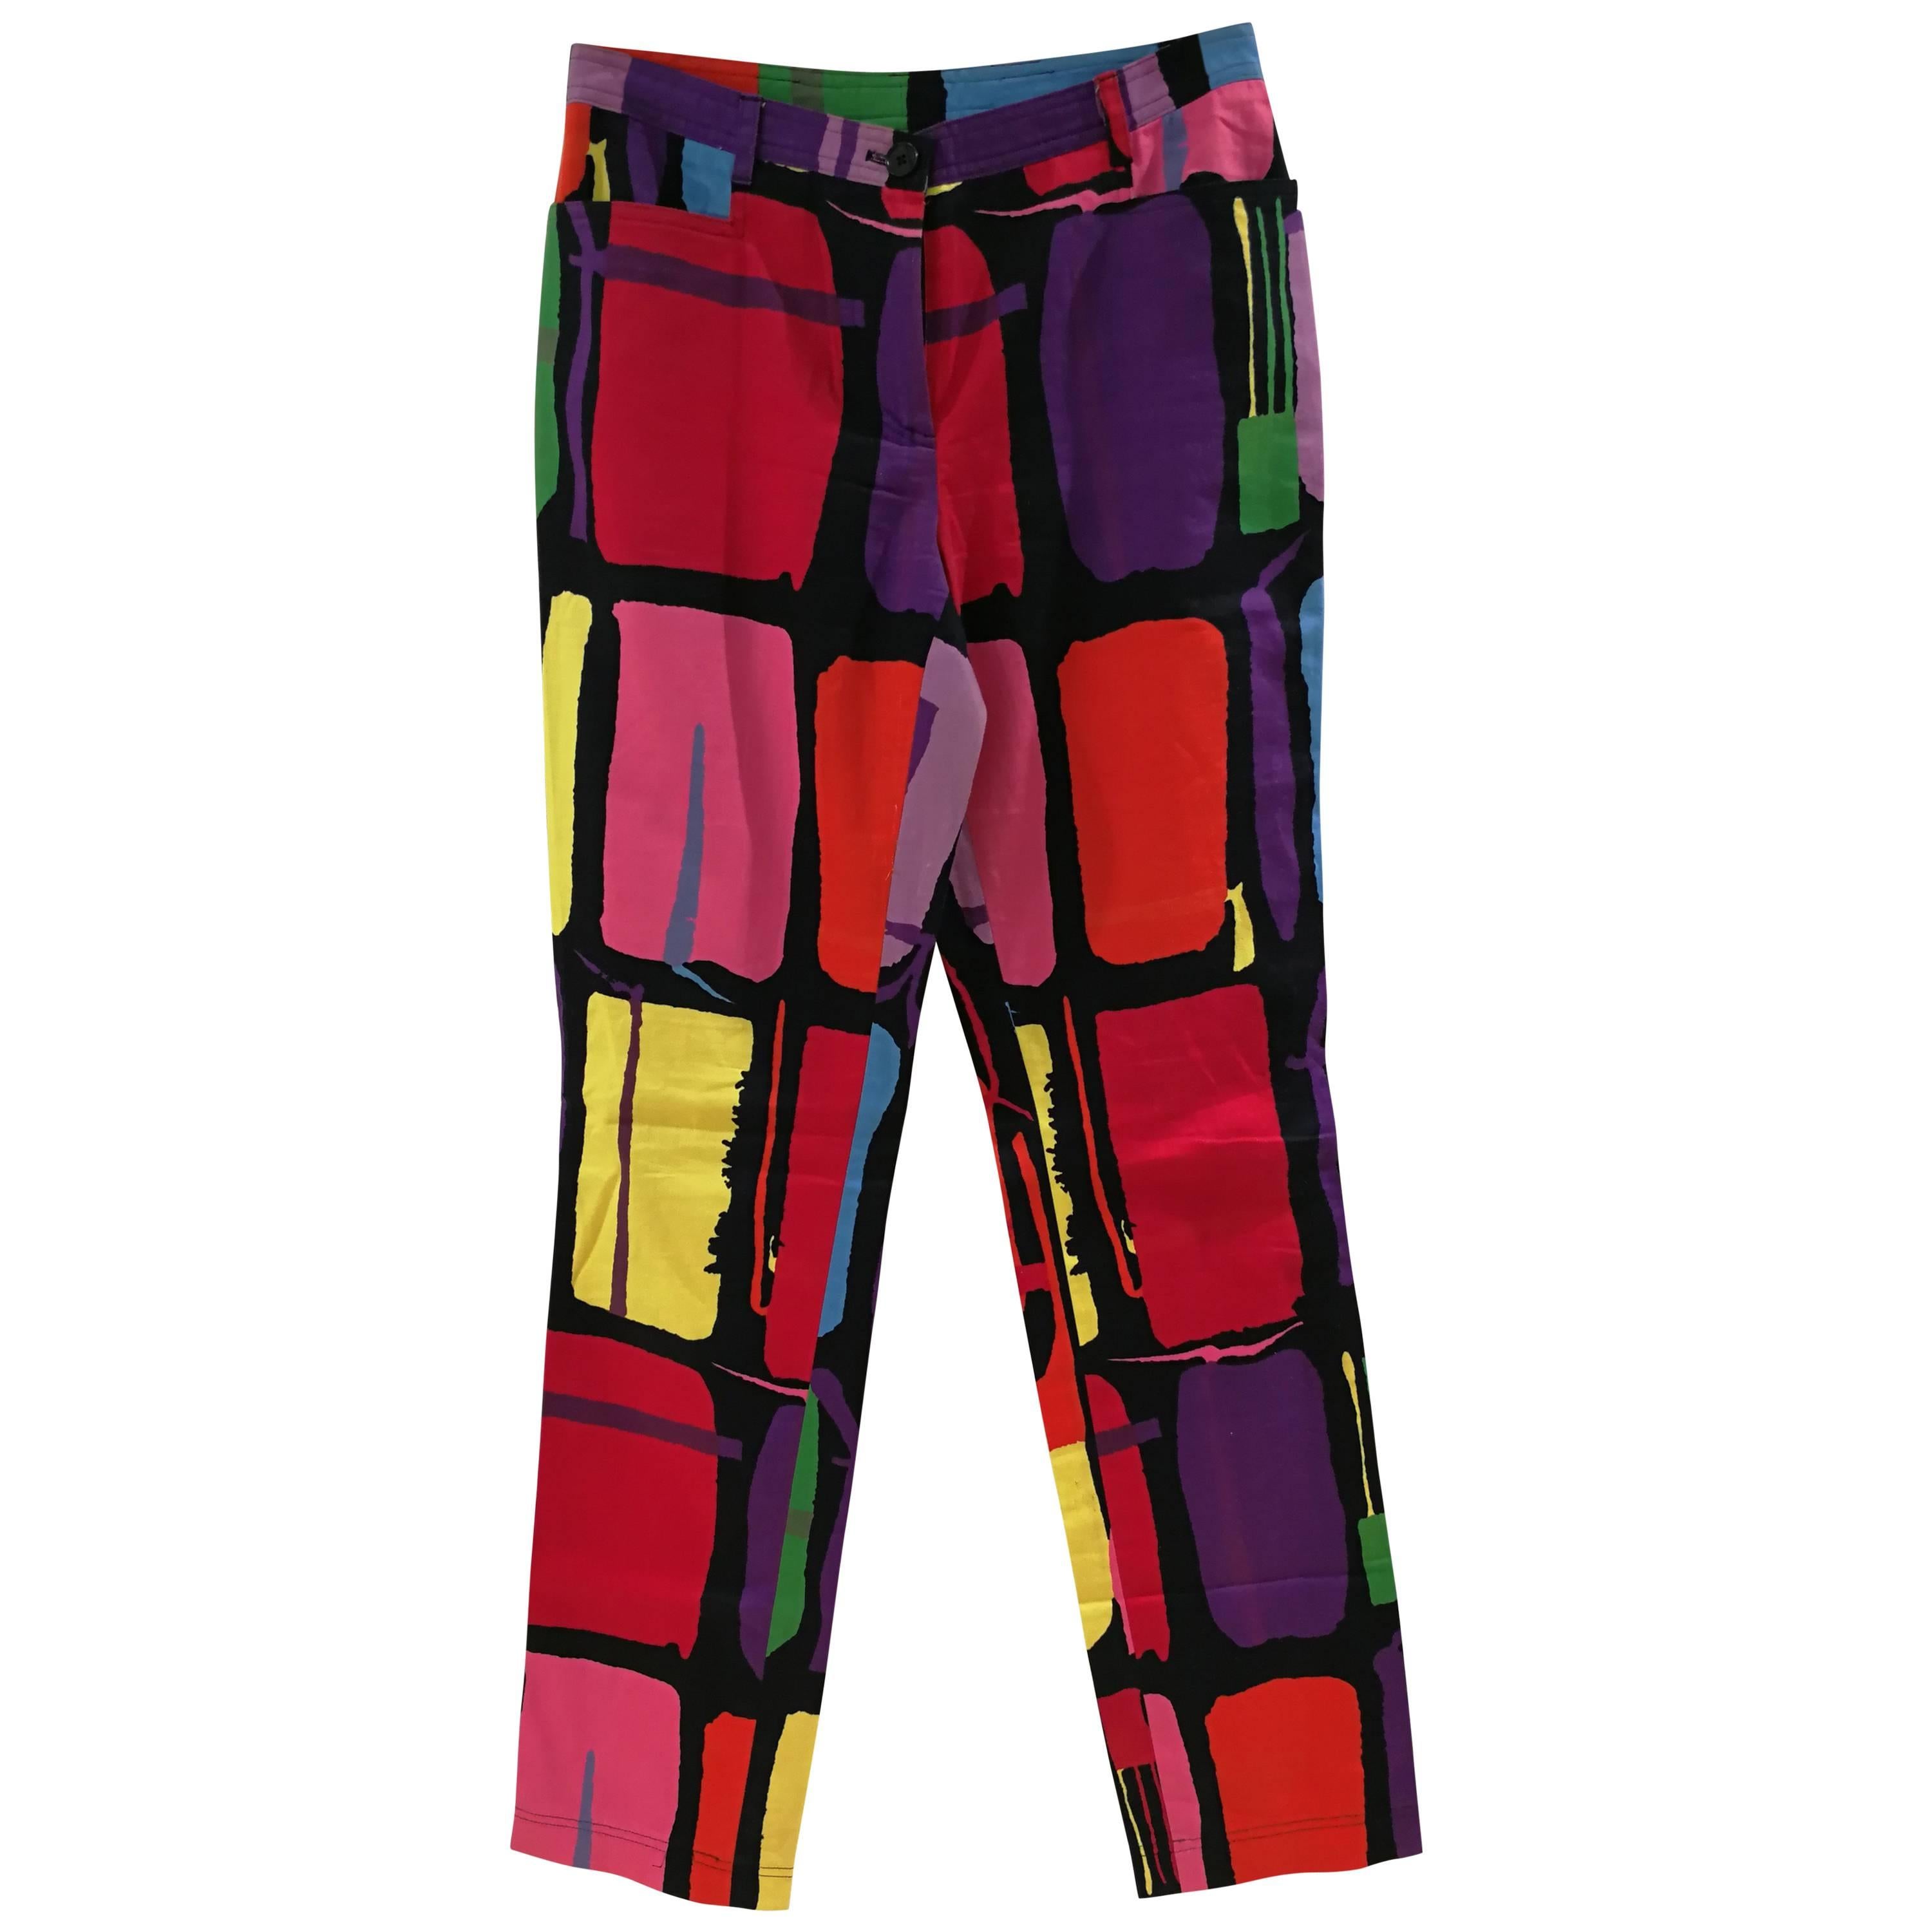 Moschino Cheap & Chic multicoloured Trousers